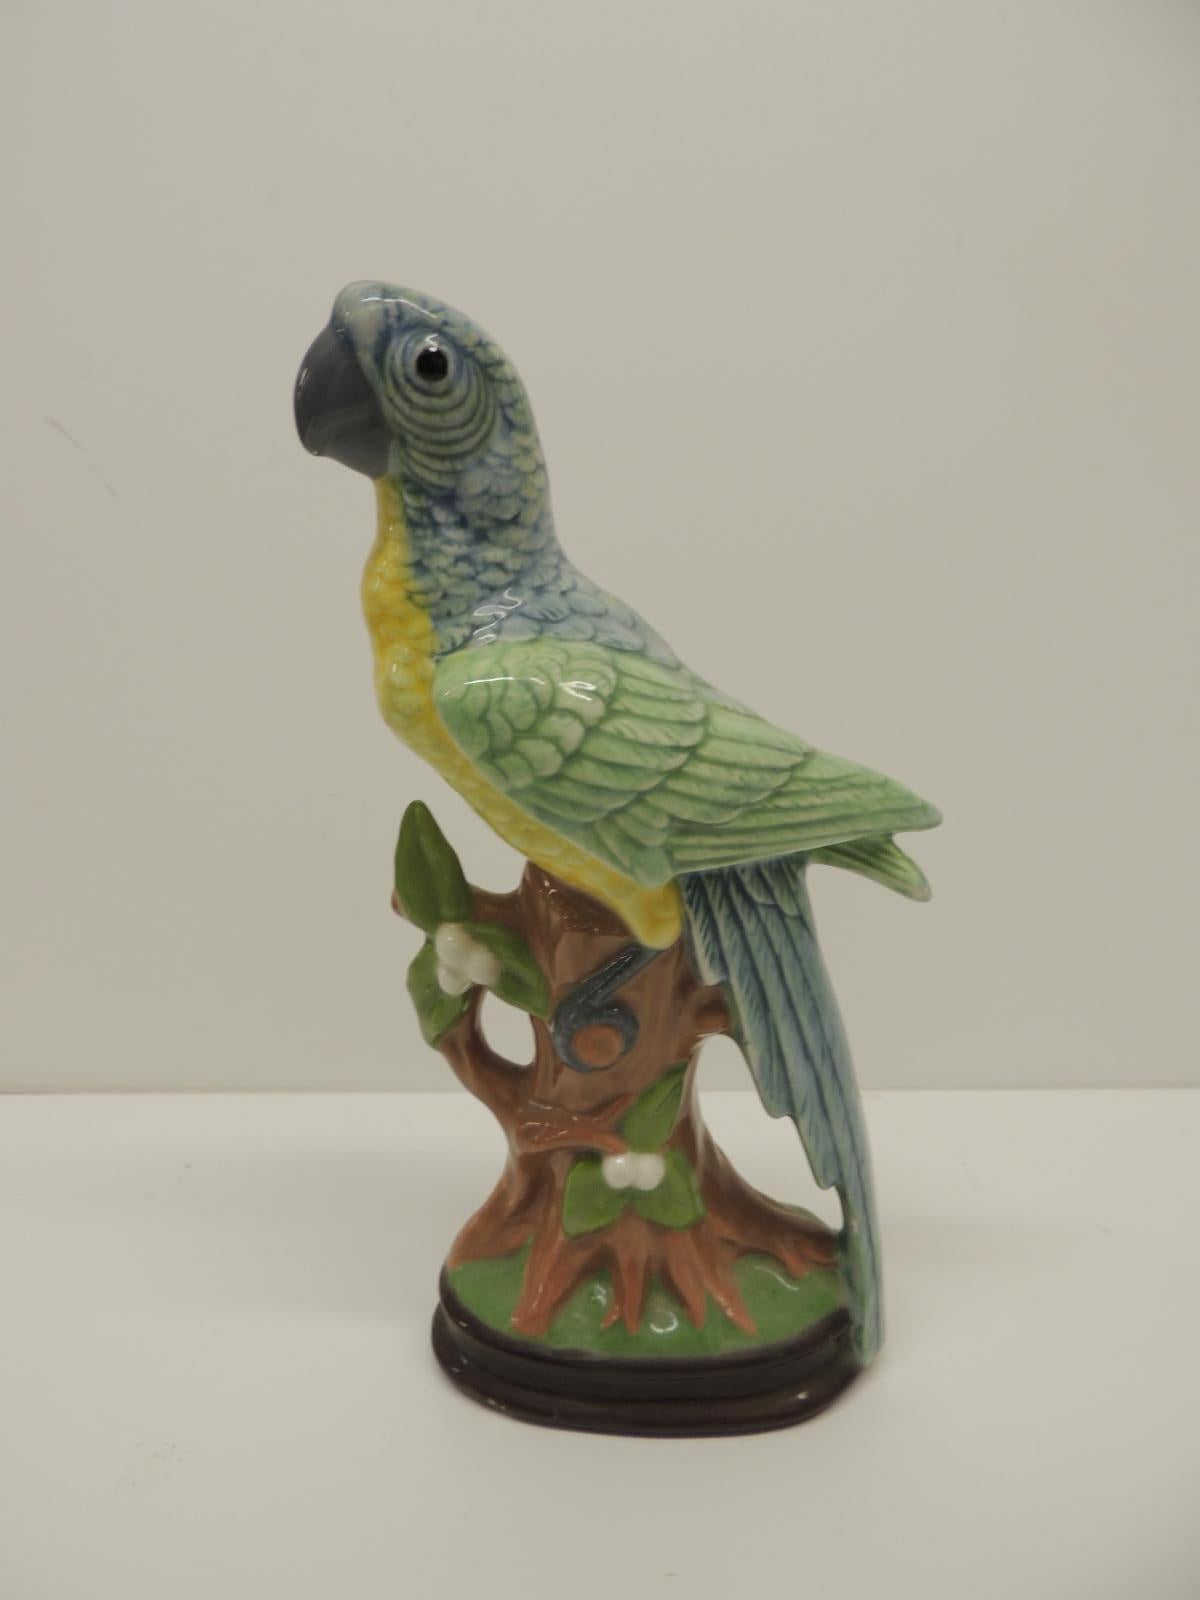 Chinese export ceramic parrot on tree trunk.
In shades of blue, green, yellow, brown and antique white.
Size: 2.5 x 5 x 10 H.